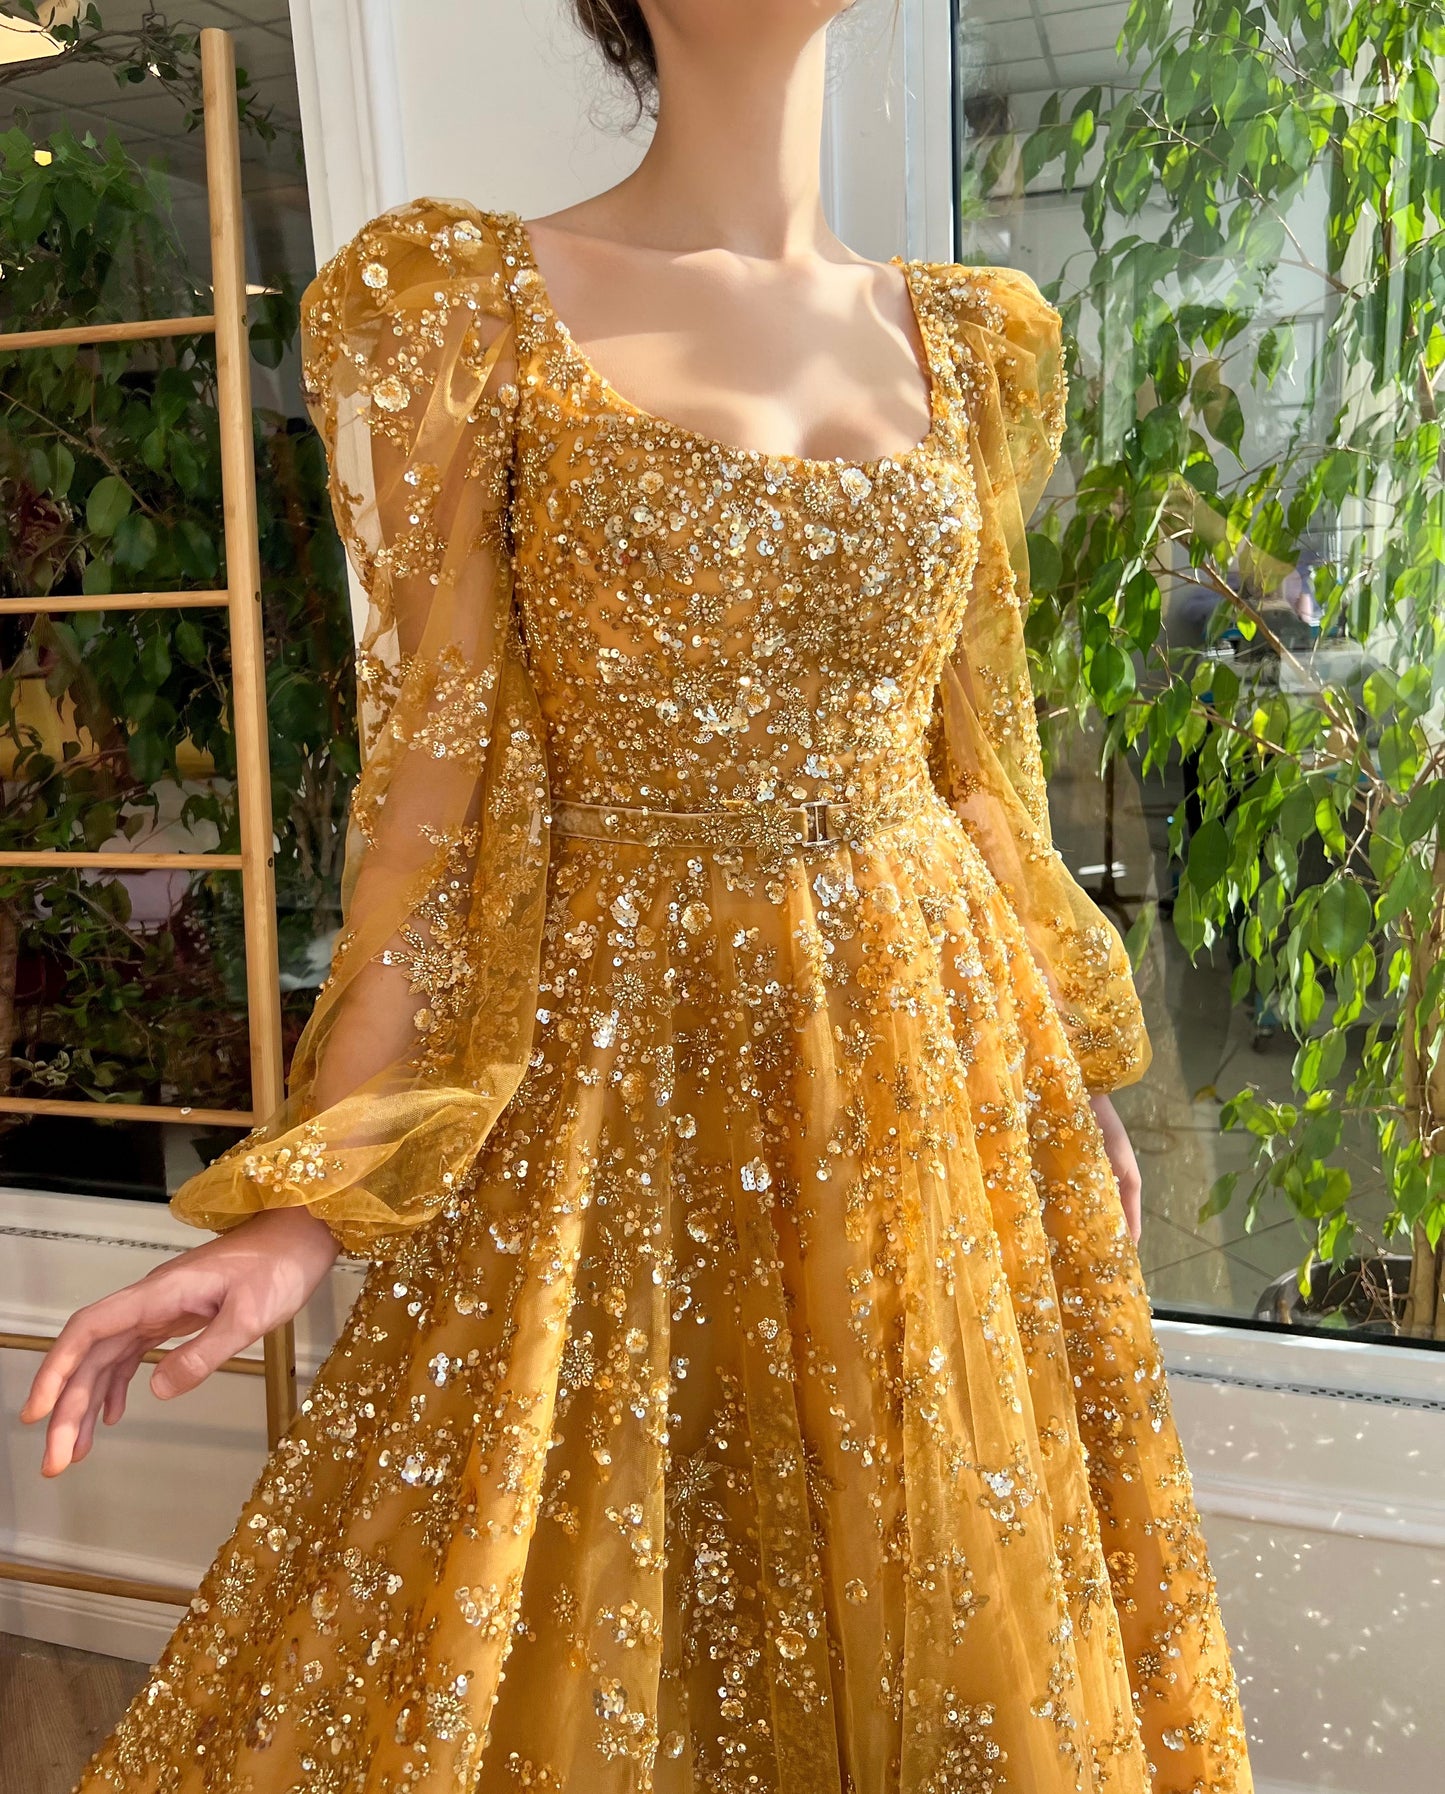 Gold A-line dress with long sleeves, belt and beading.